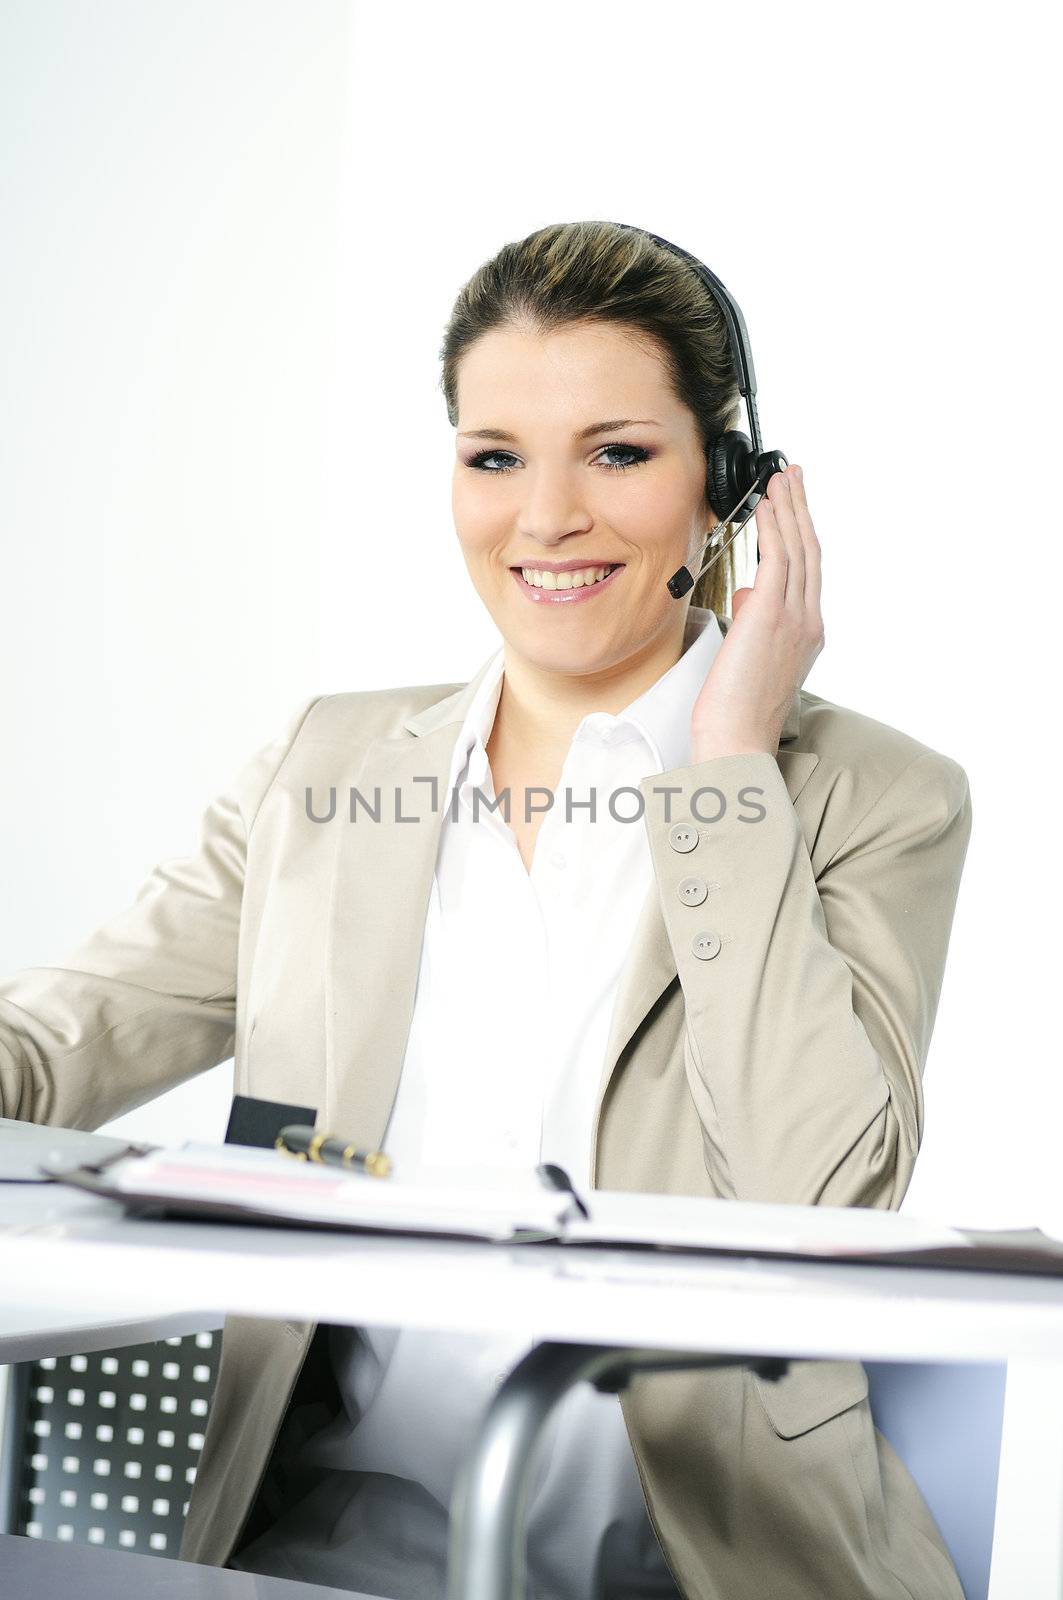 Face of young charming confident woman with headset